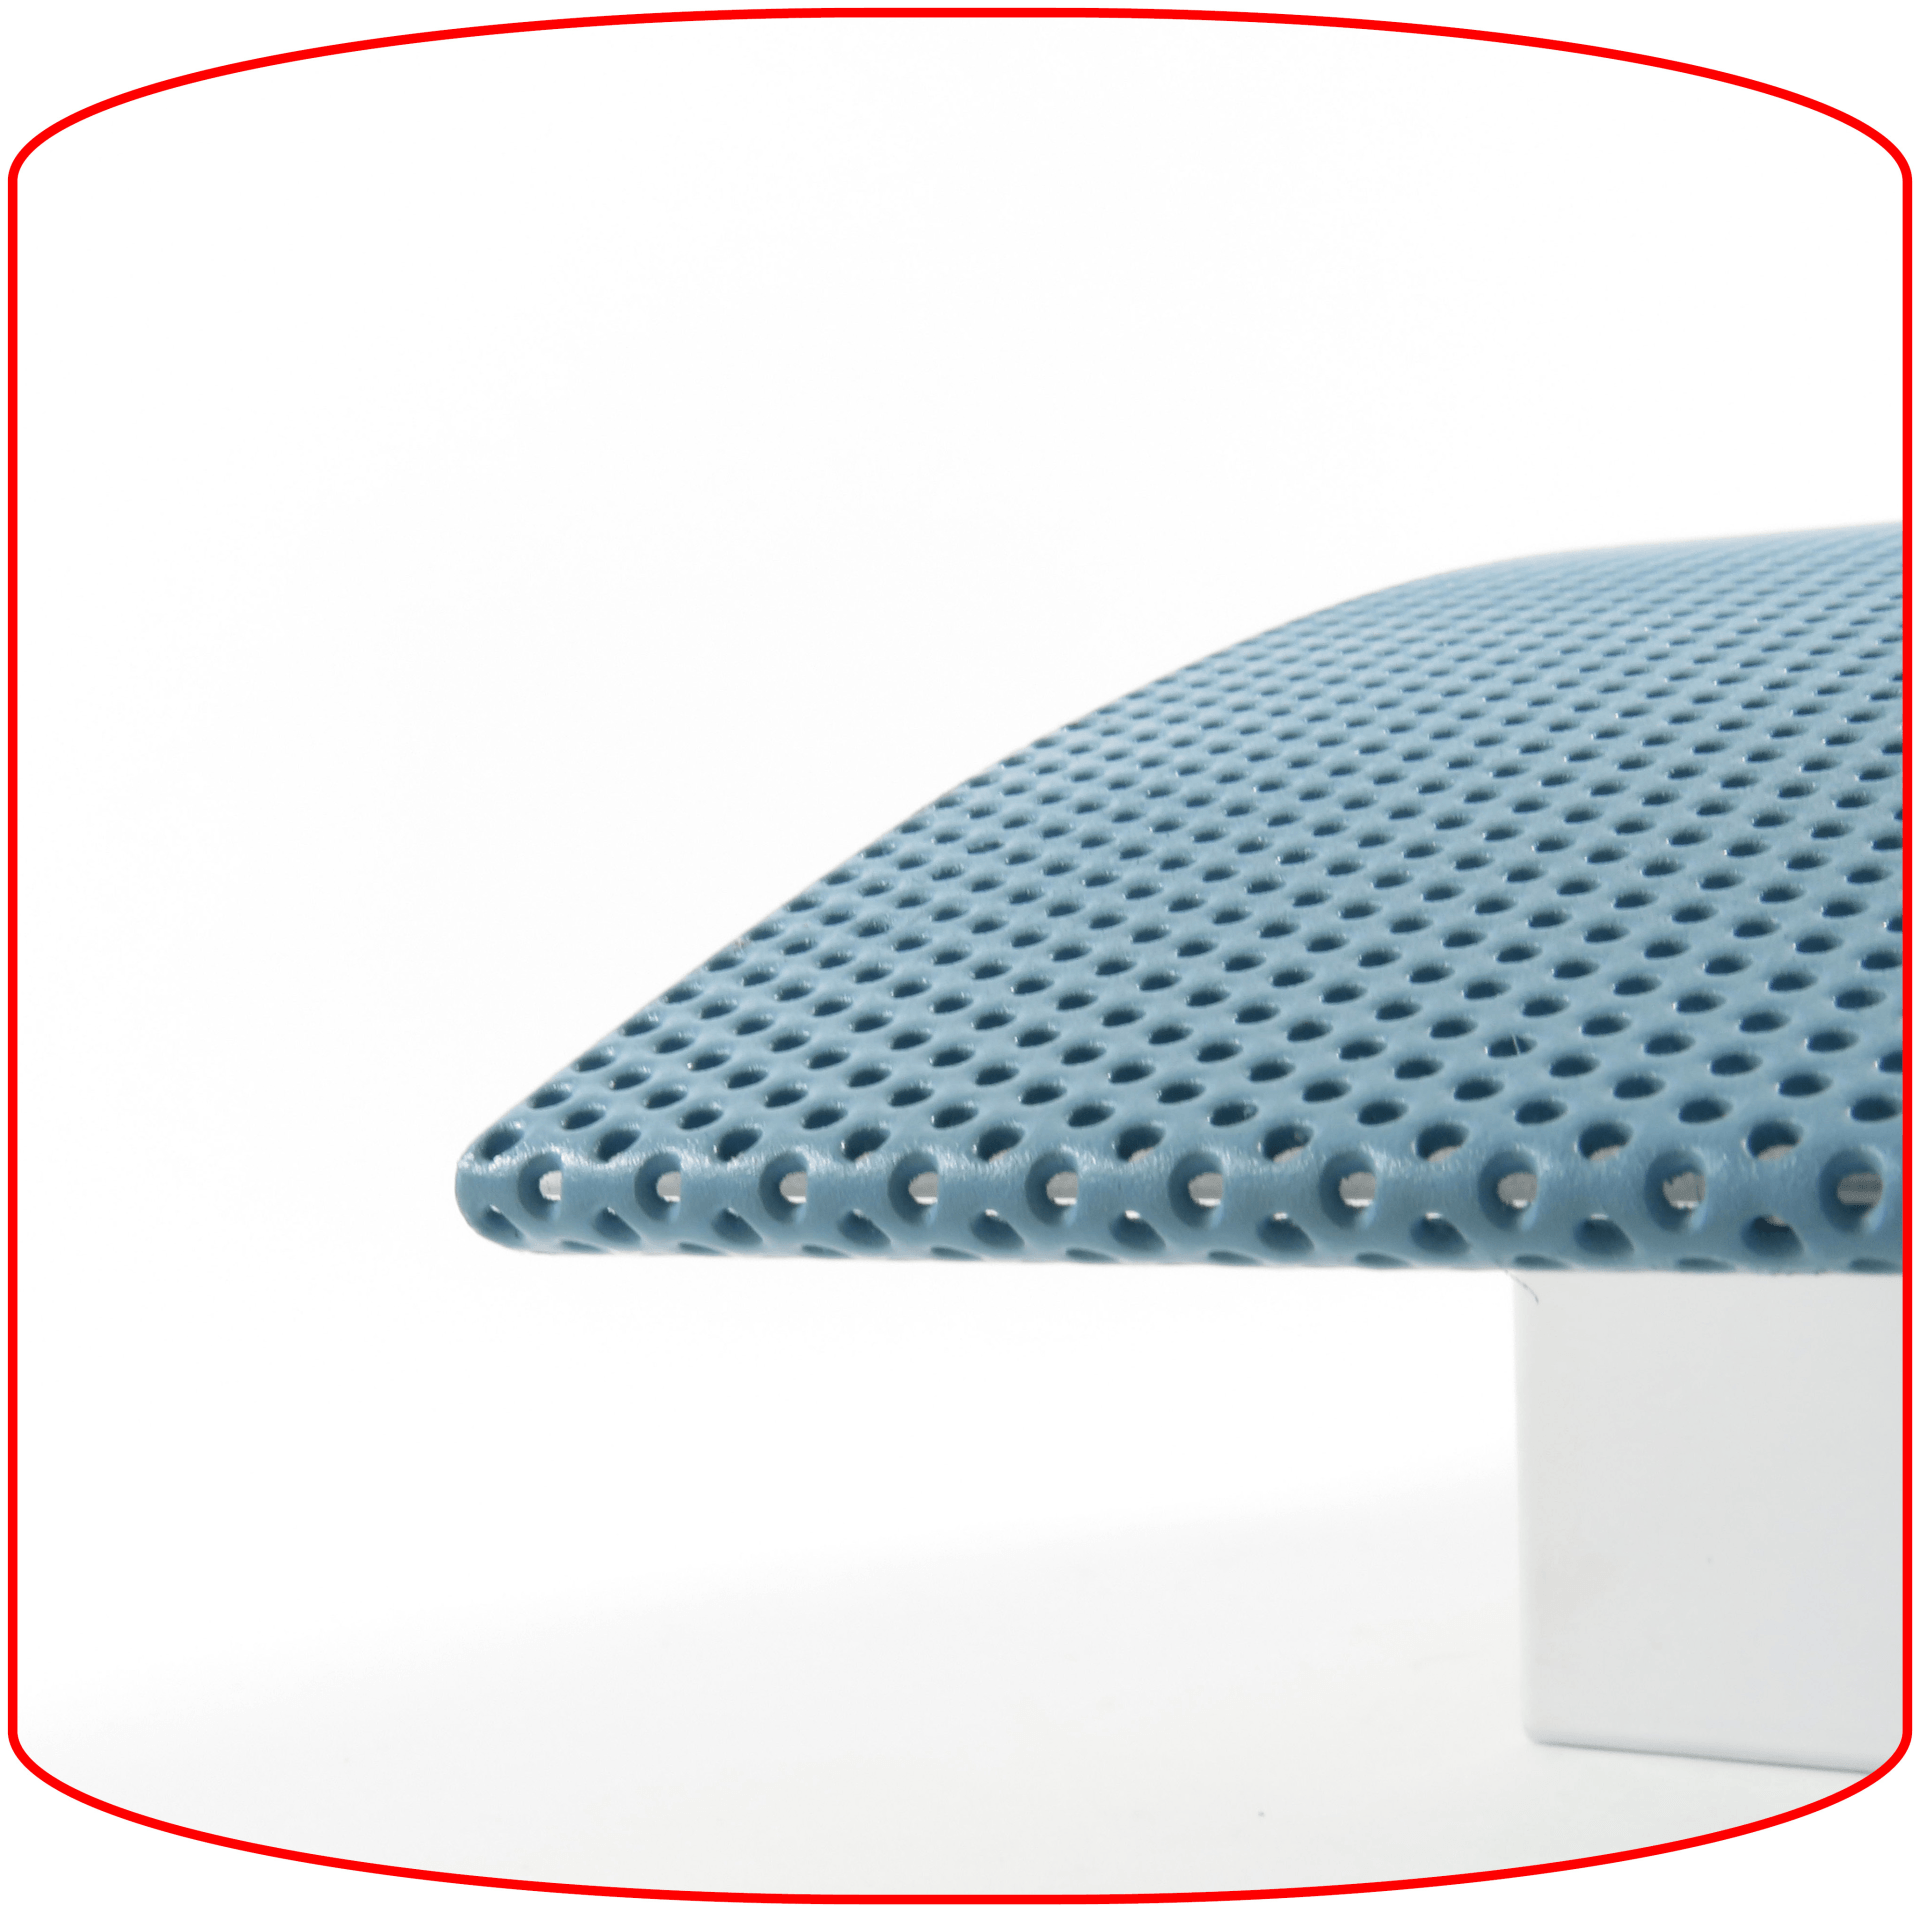 BLUE CURVED PERFORATED WALL LAMP, RIDI LEUCHTEN GMBH